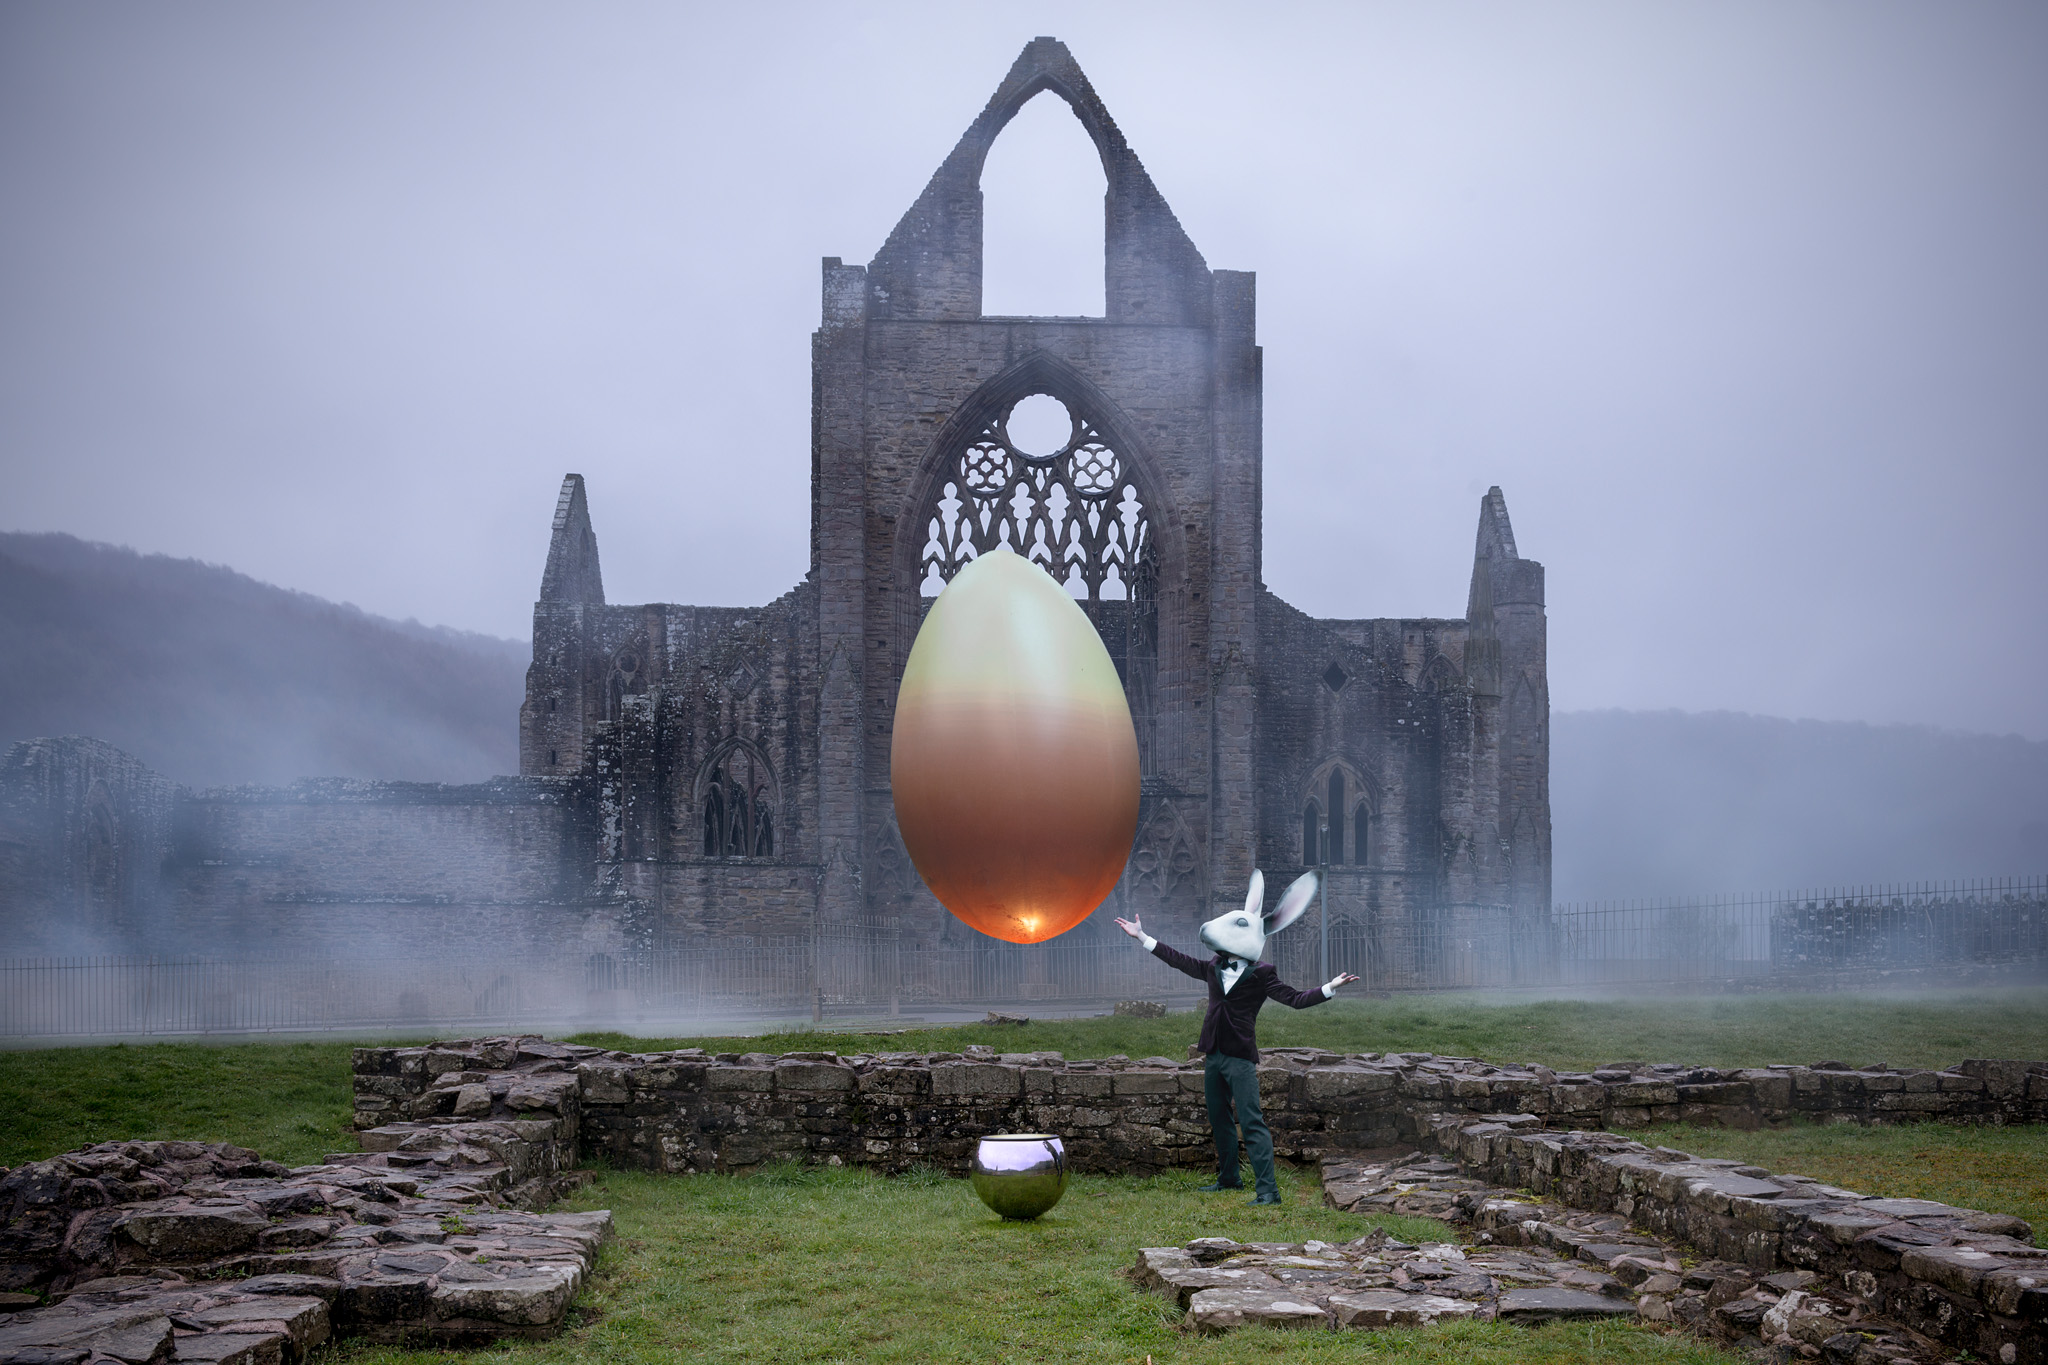  The floating egg was created by the ingenious folk at  Guineapig . It was filled with a mix of helium and air and floated over a jet of air from the chrome ball below. Photographed at Tintern Abbey 